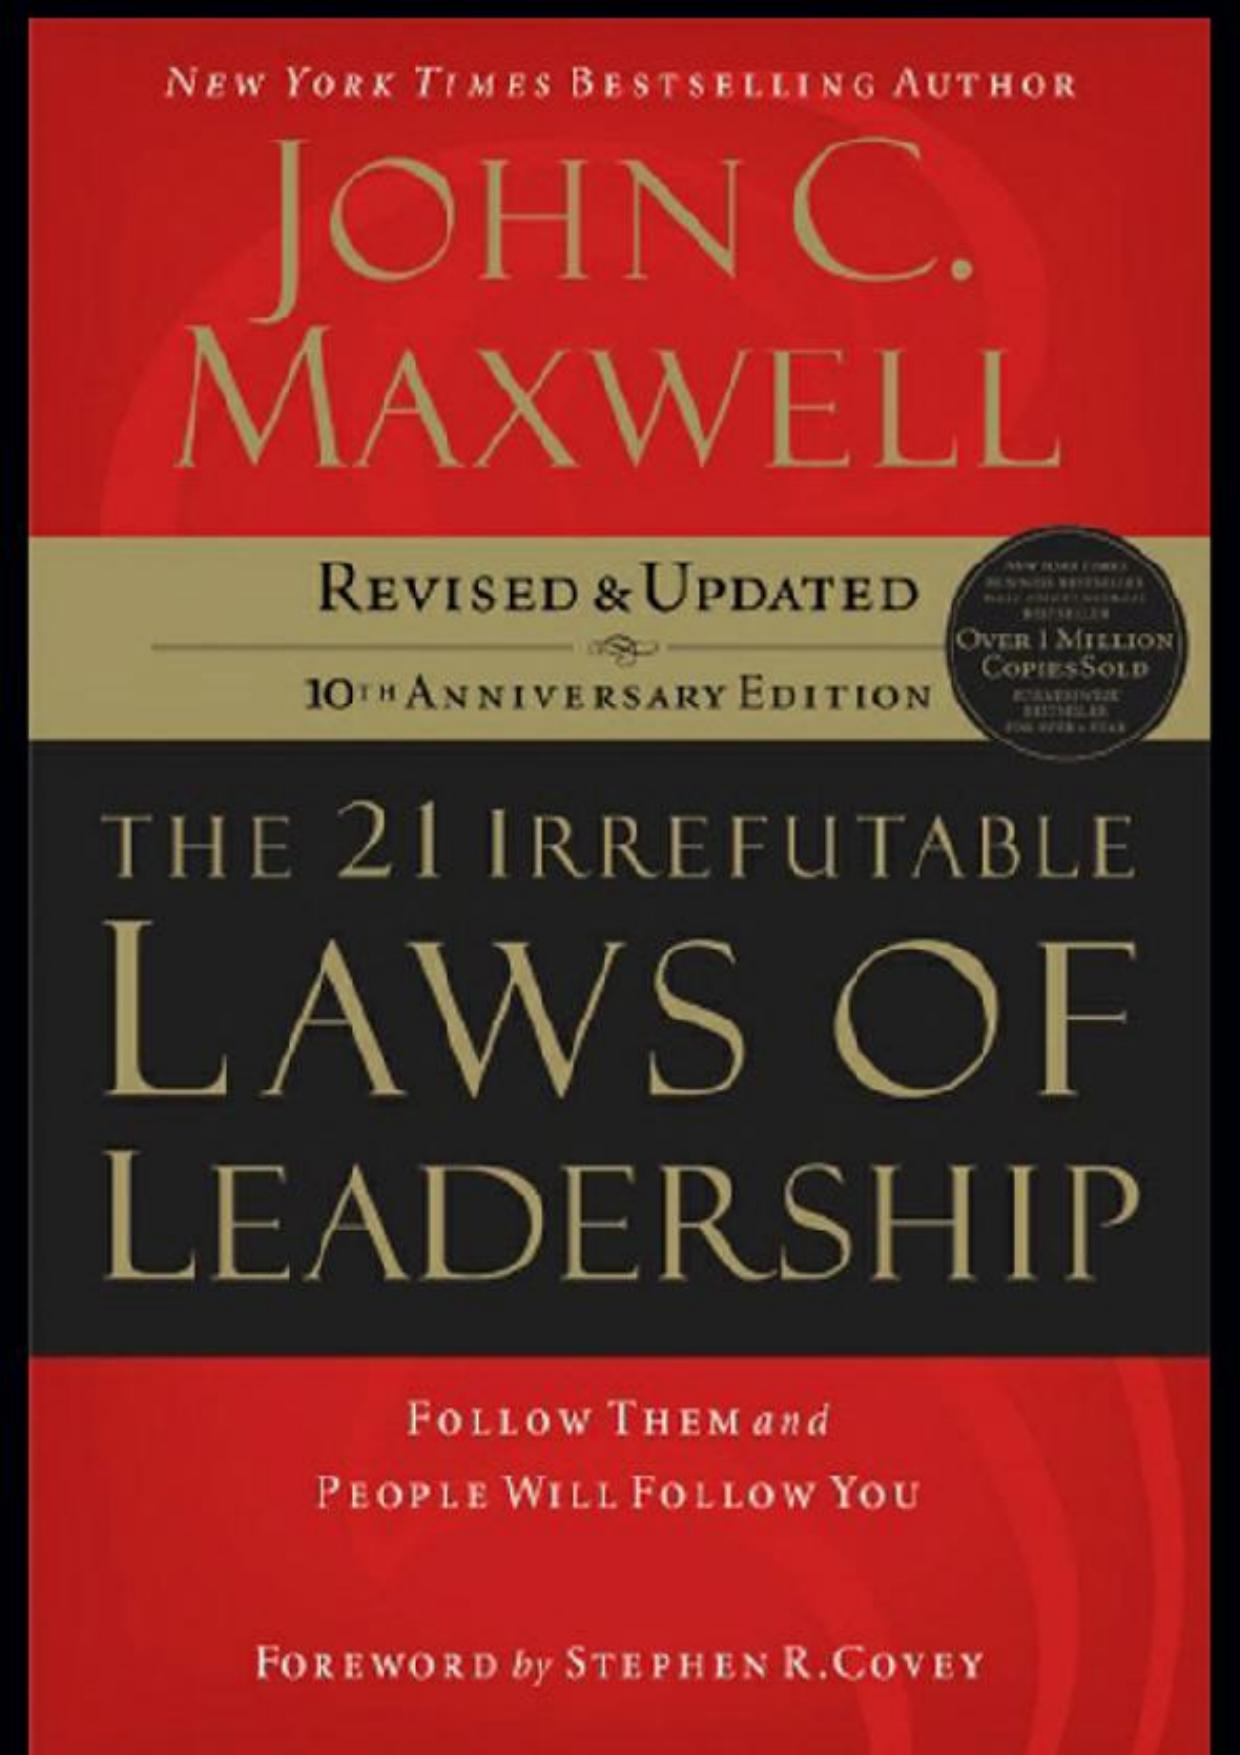 21 Irrefutable Laws of Leadership (10th Anniversary Edition) (Expanded) by John C. Maxwell